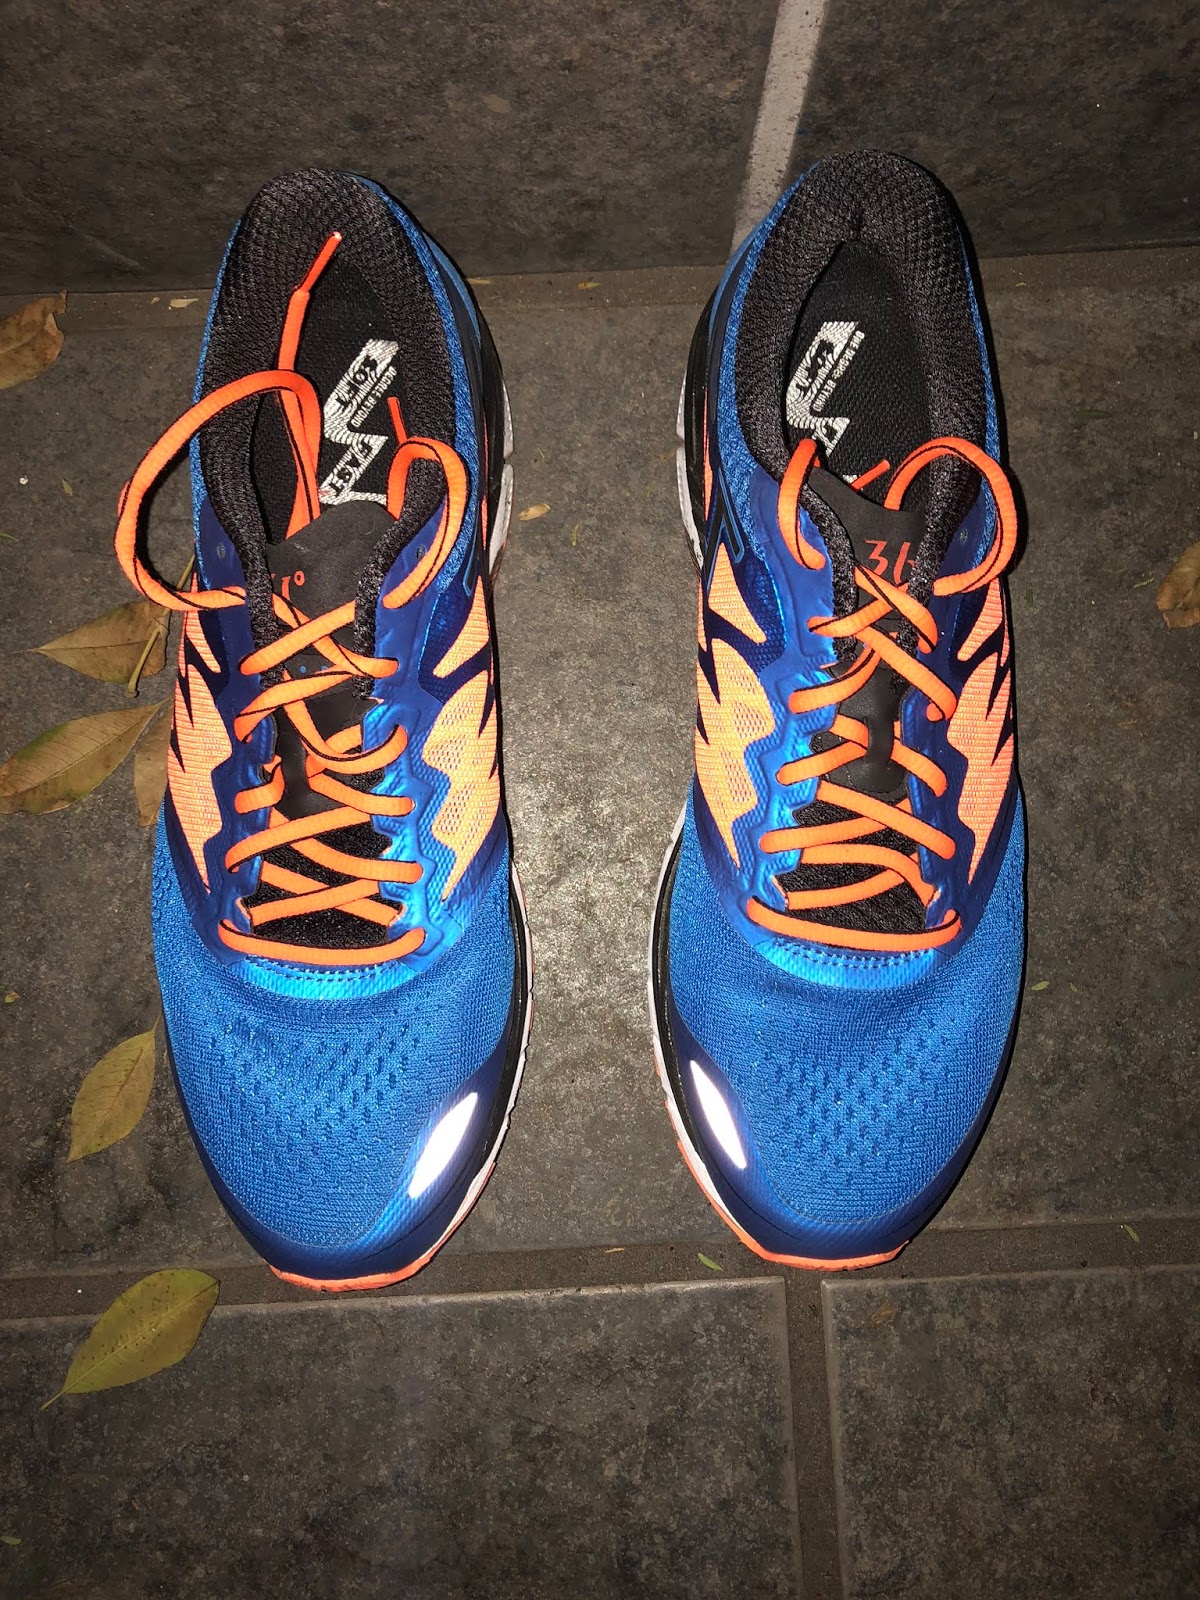 361 Strata 2 Review - DOCTORS OF RUNNING